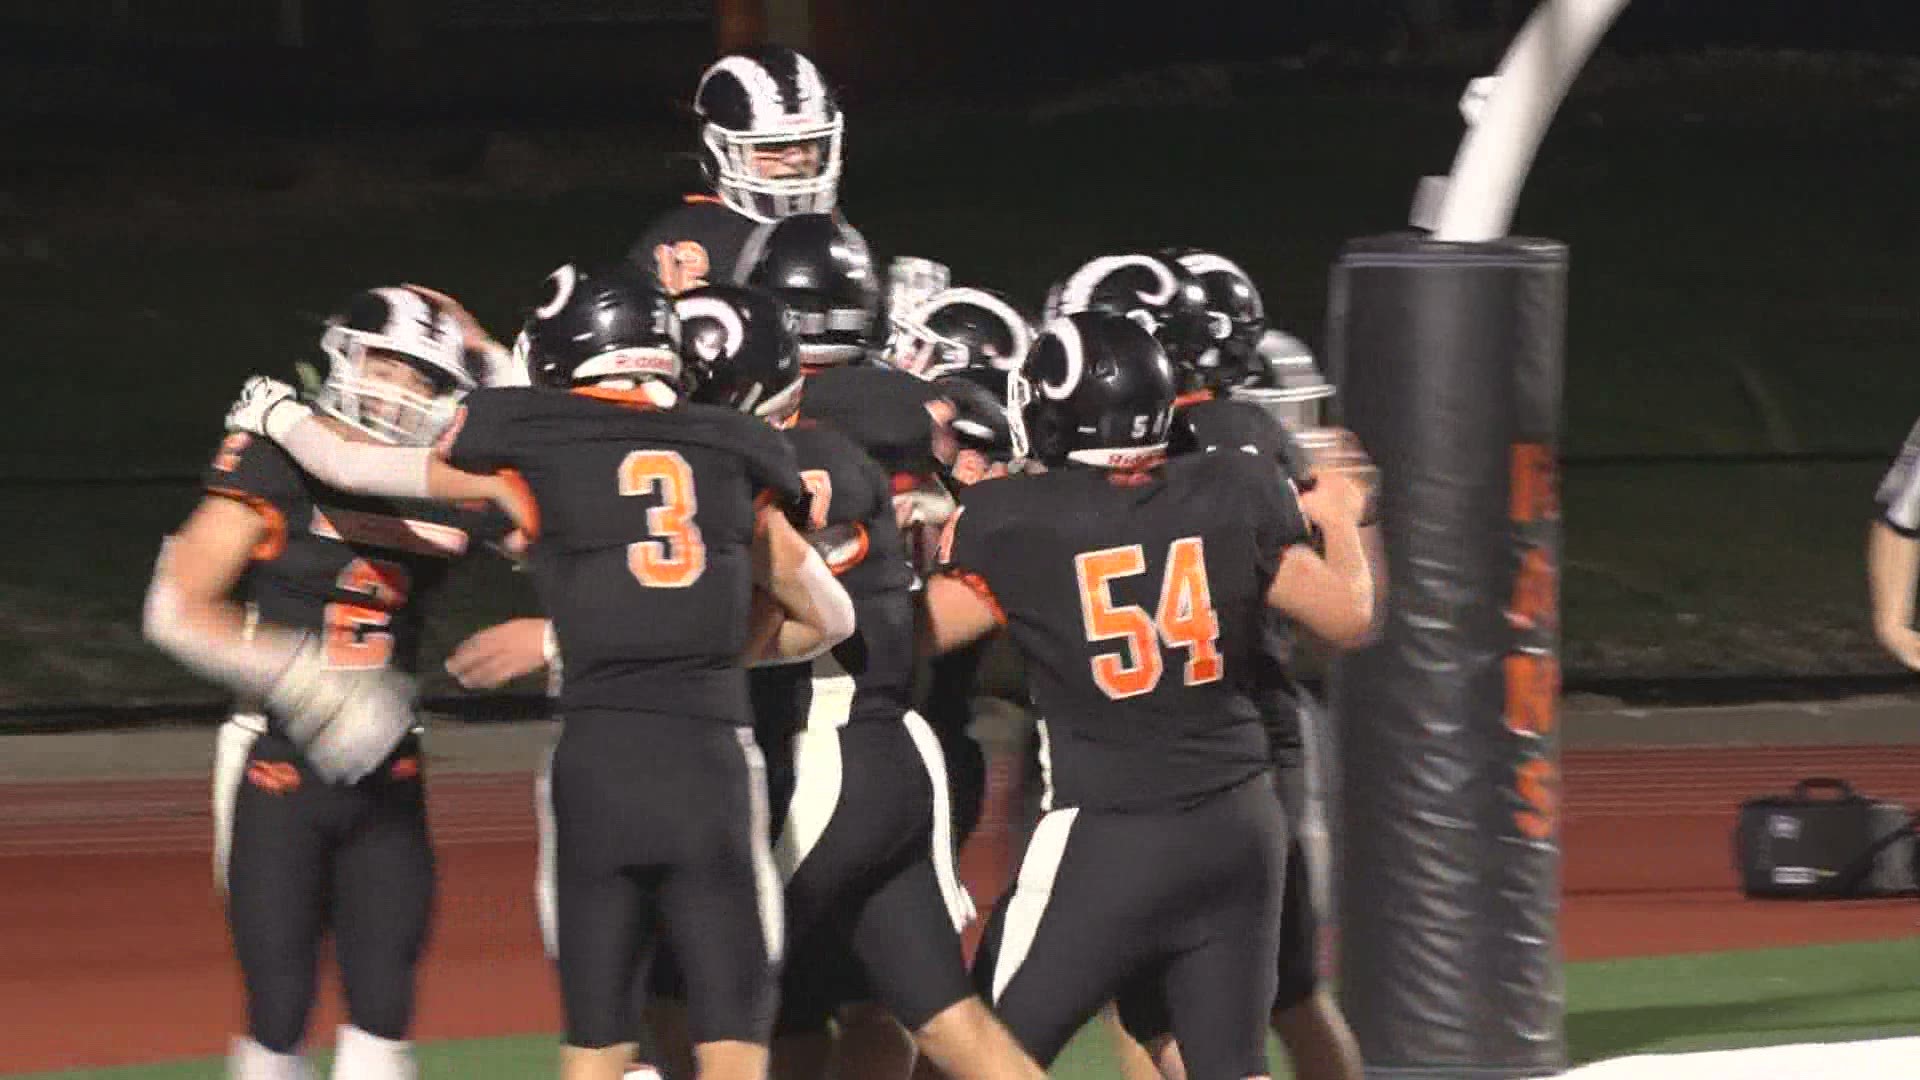 In week two of the playoffs, Rockford faced Hudsonville.